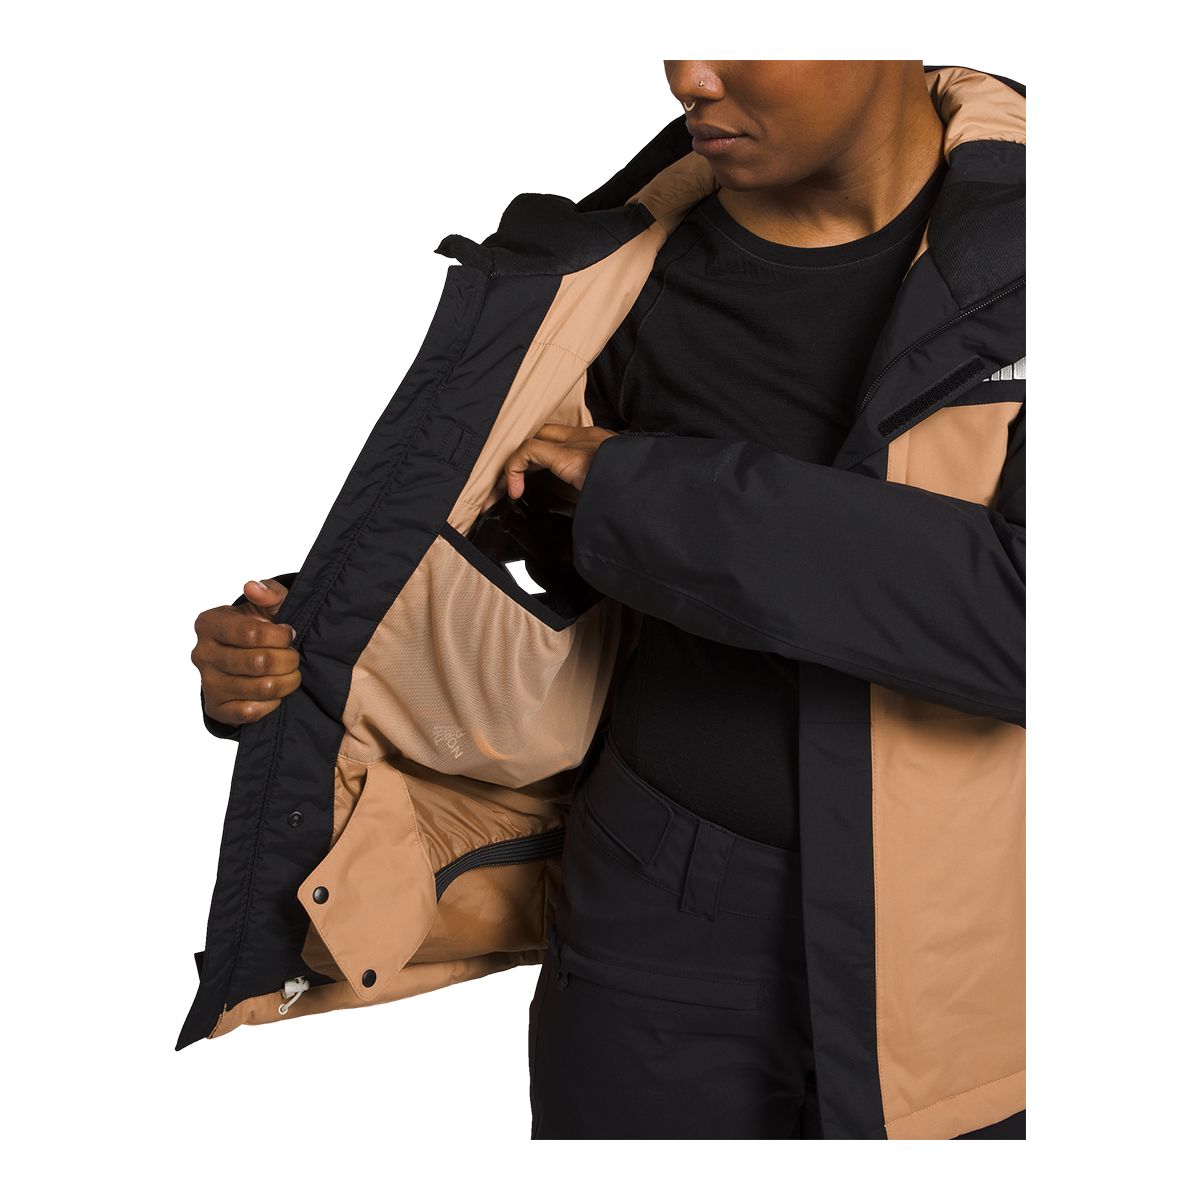 The North Face Women's Freedom Insulated Jacket